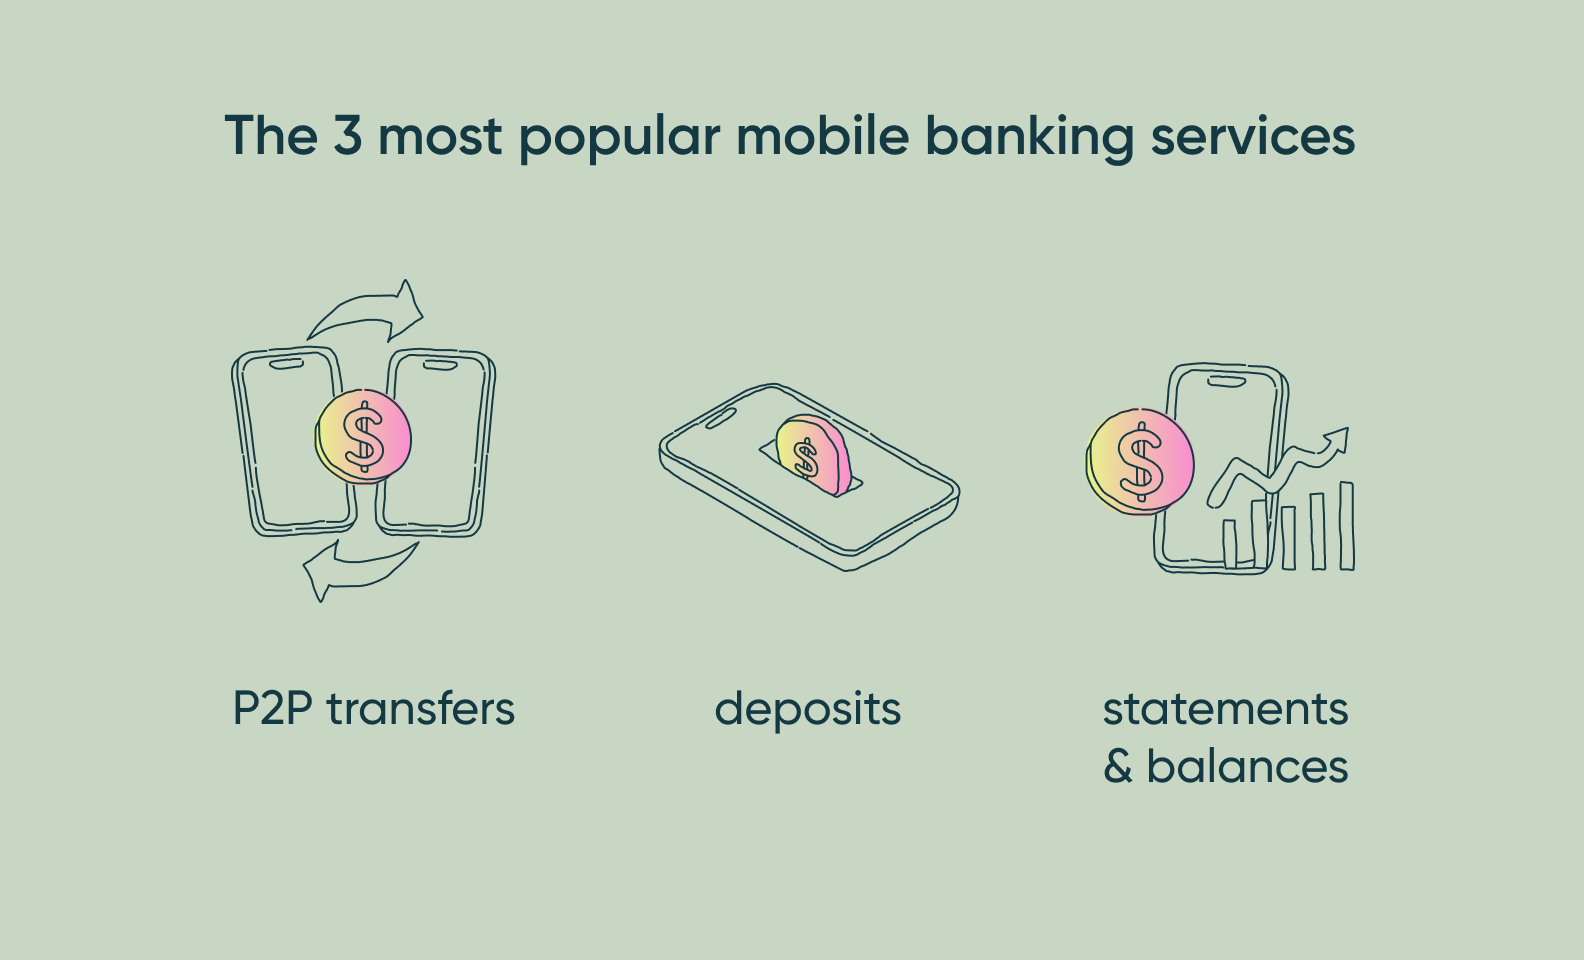 A scheme demonstrating the 3 most popular features in mobile banking: P2P transfers, deposits, statements & balances